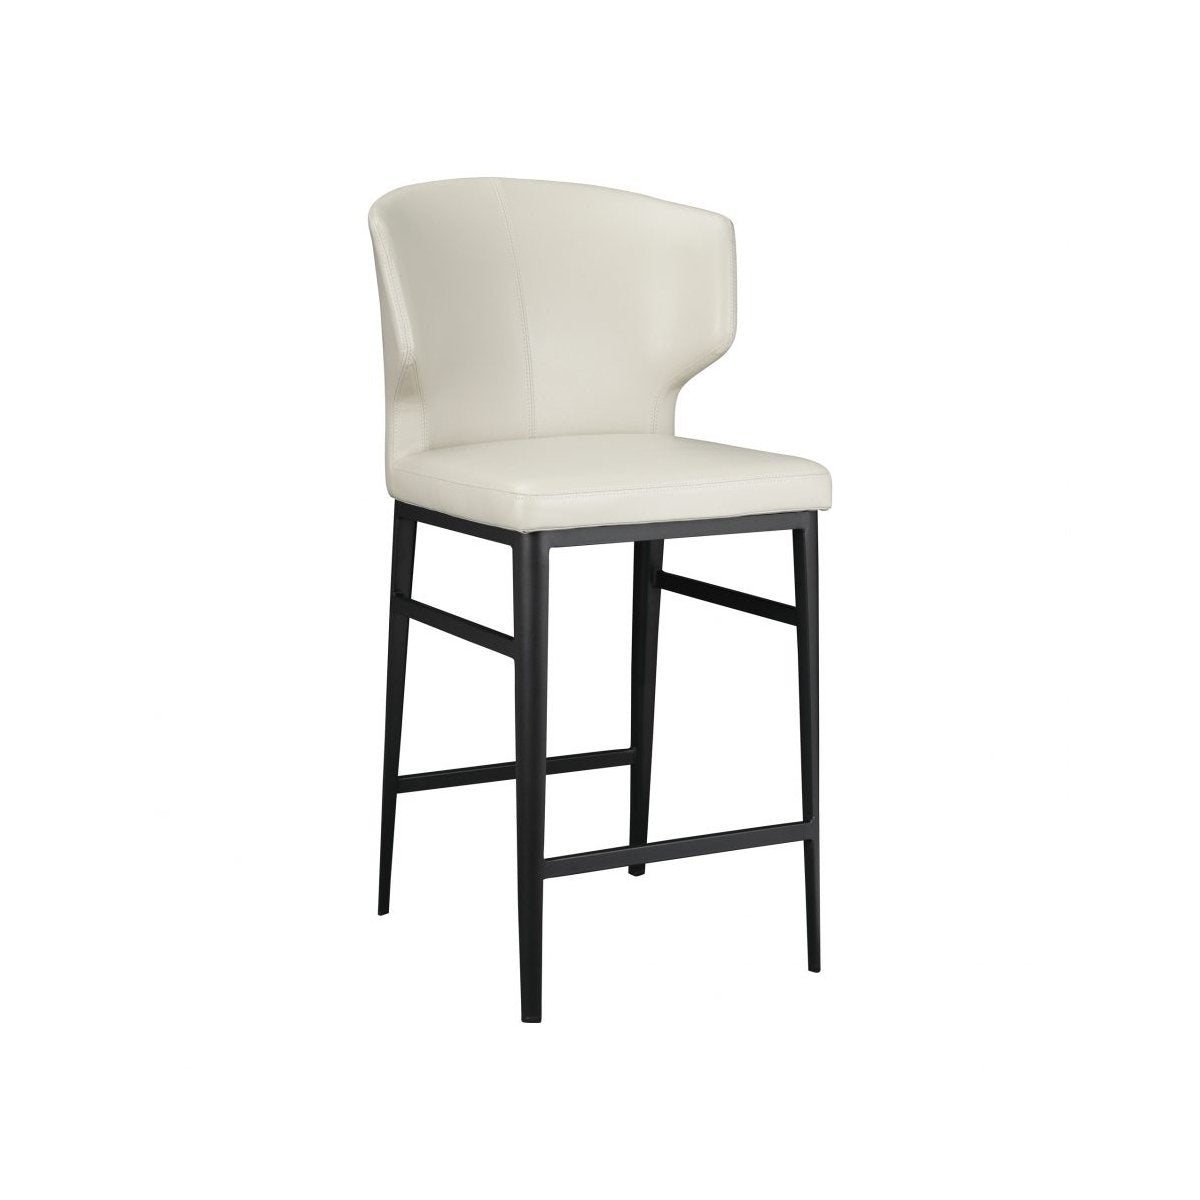 Load image into Gallery viewer, Delaney Counter Stool BeigeCounter Stools Moe&amp;#39;s  Beige   Four Hands, Burke Decor, Mid Century Modern Furniture, Old Bones Furniture Company, Old Bones Co, Modern Mid Century, Designer Furniture, https://www.oldbonesco.com/
